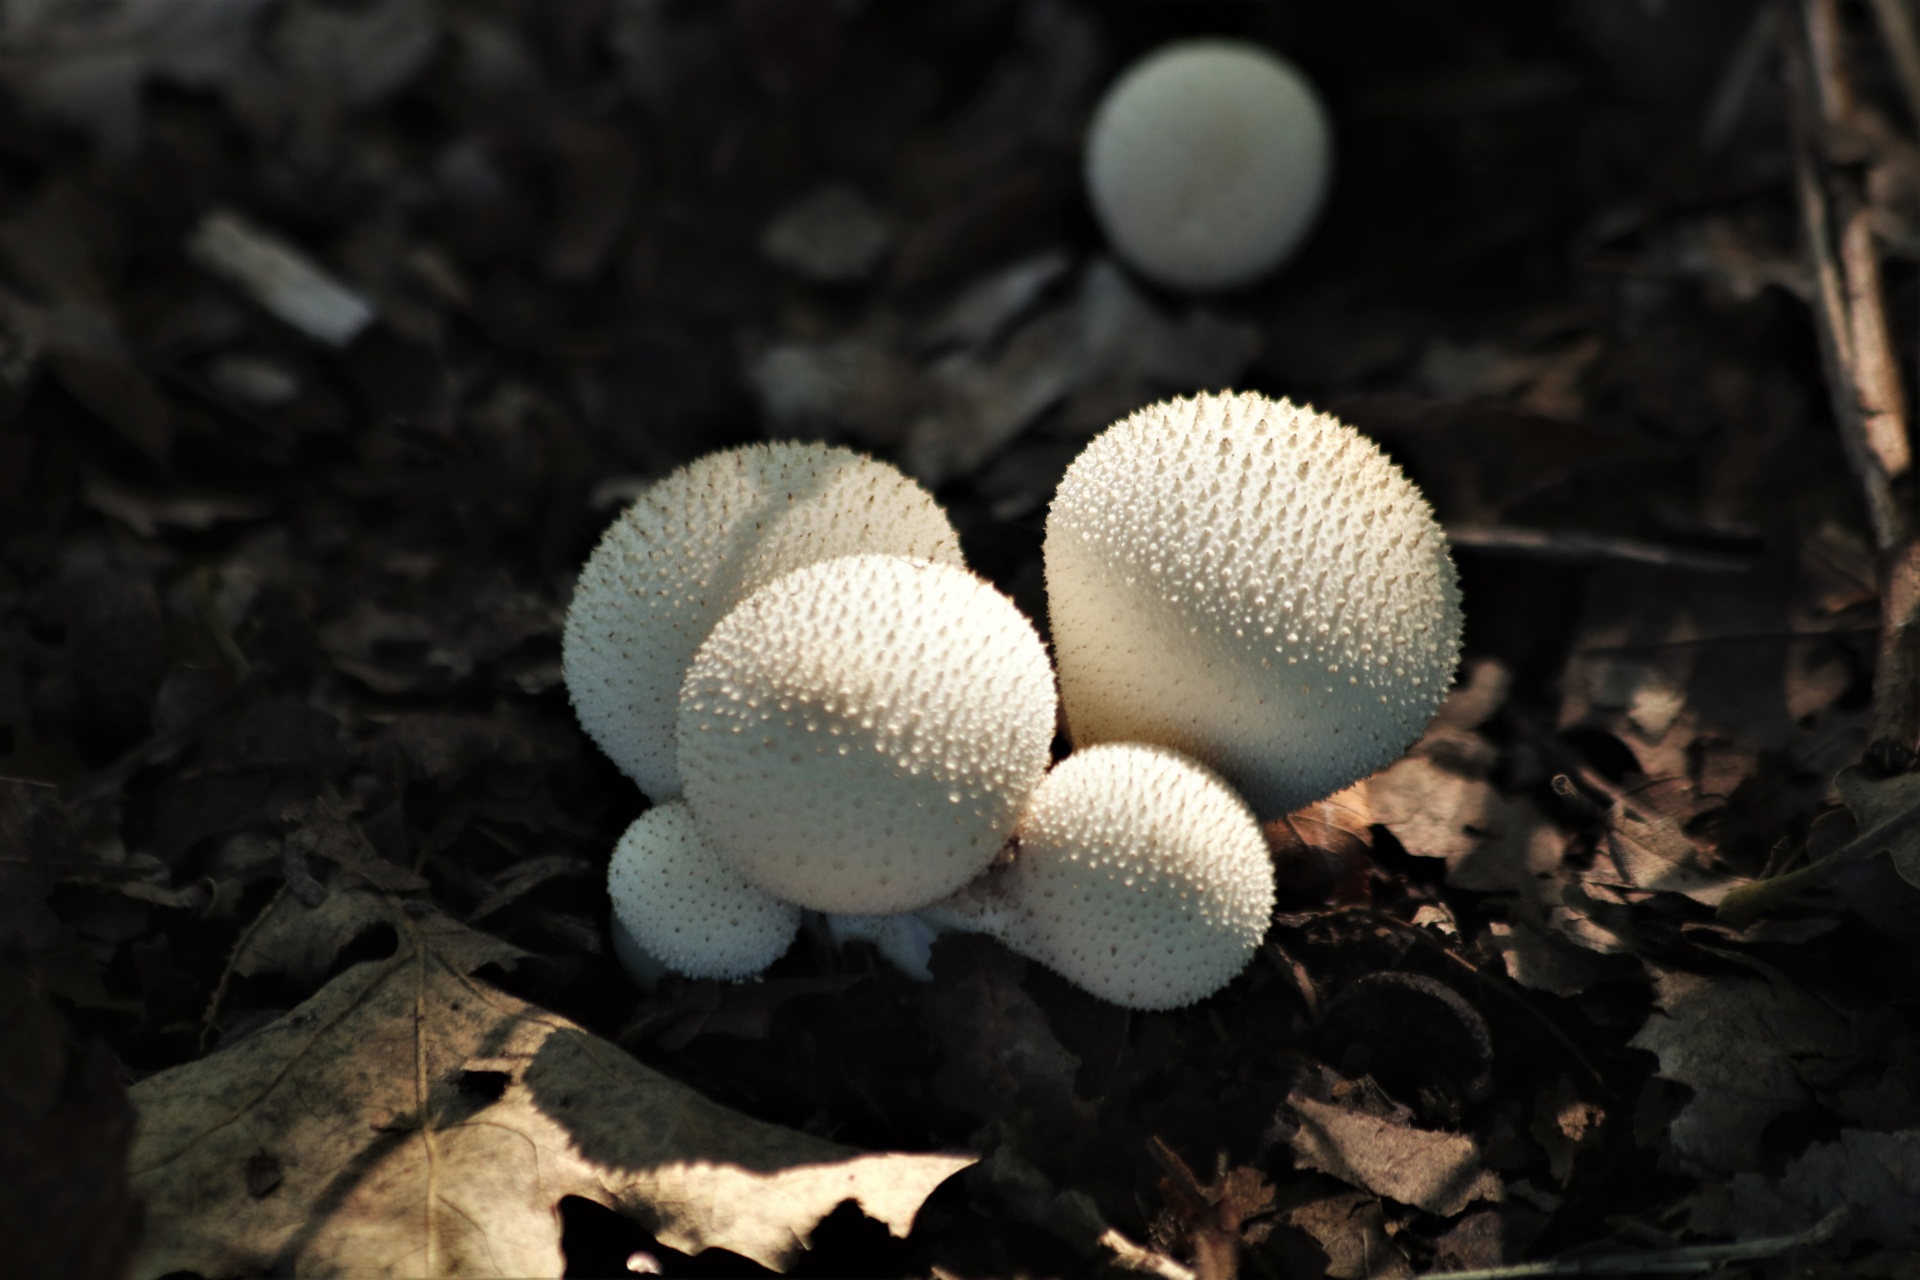 Close-up of a group of white puffball mushrooms in leaves with light and shadows.